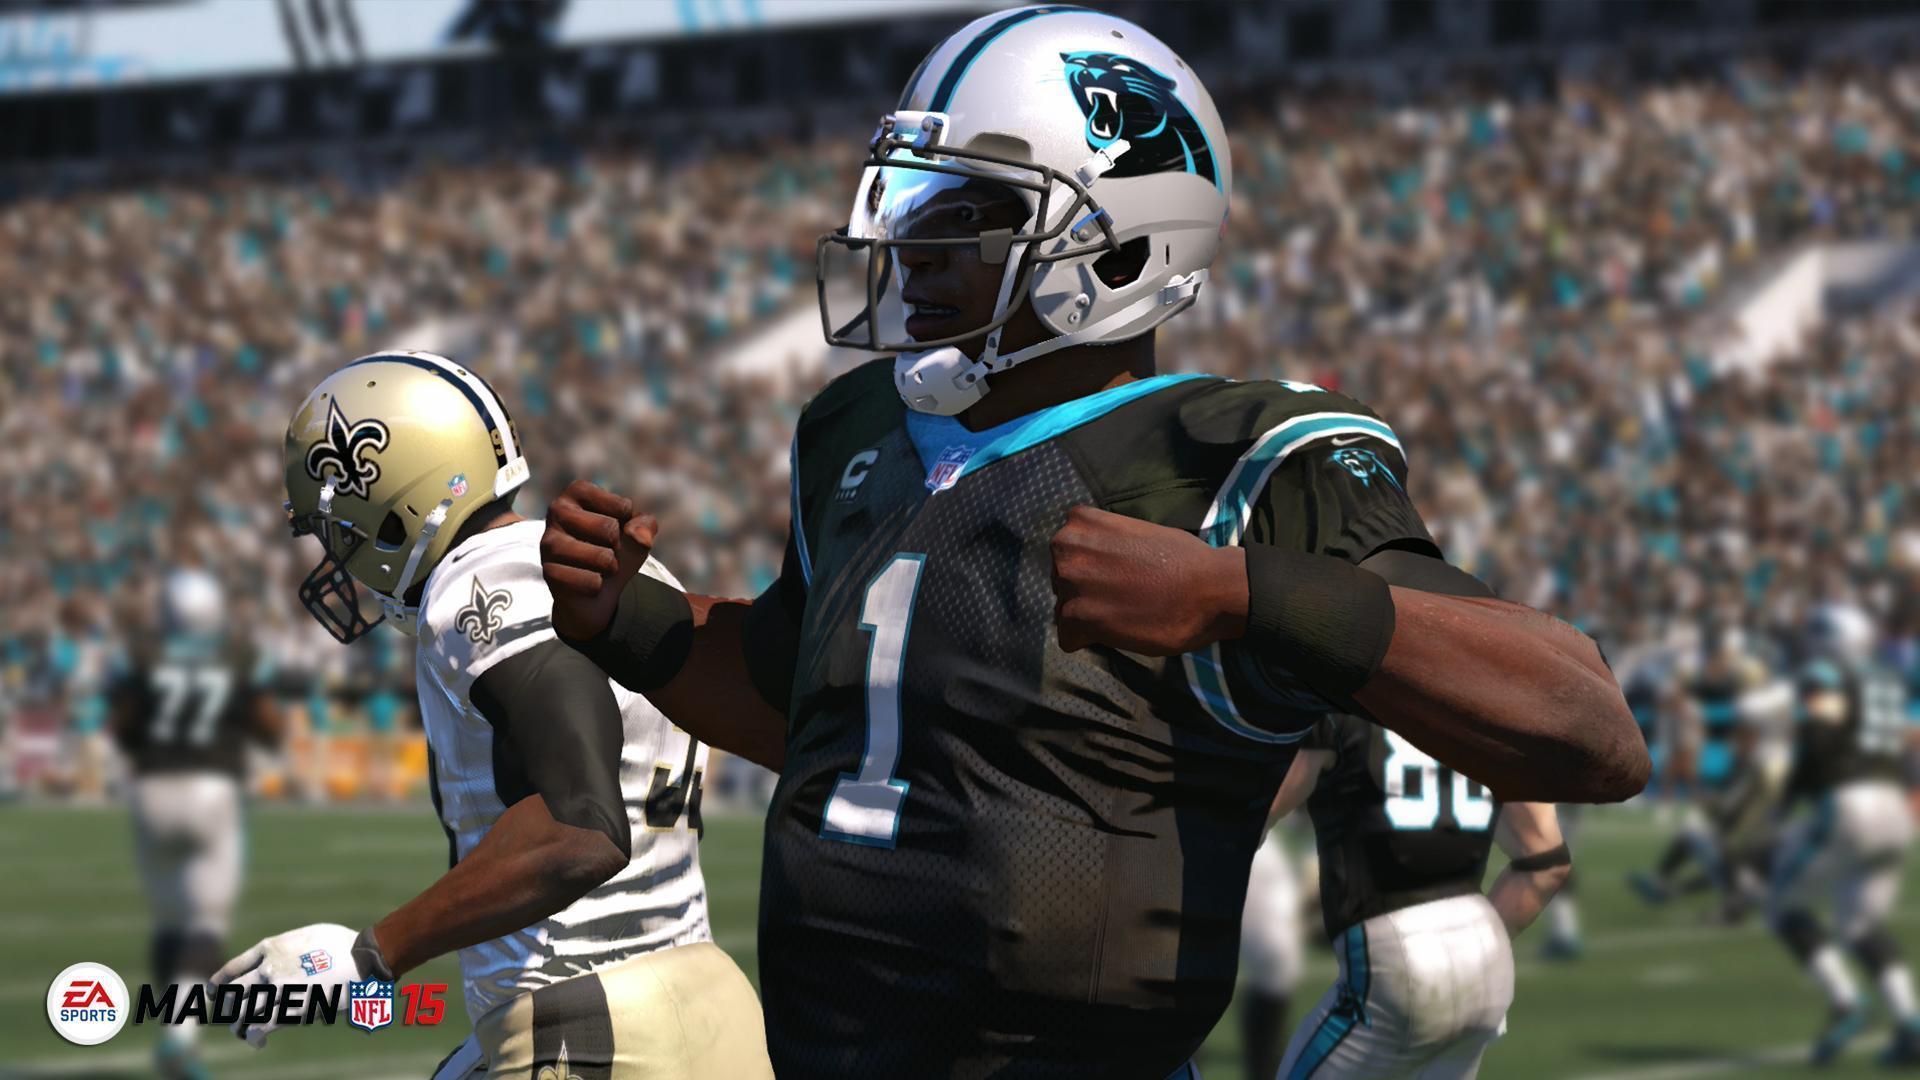 Madden Nfl 15 Screen 15.png